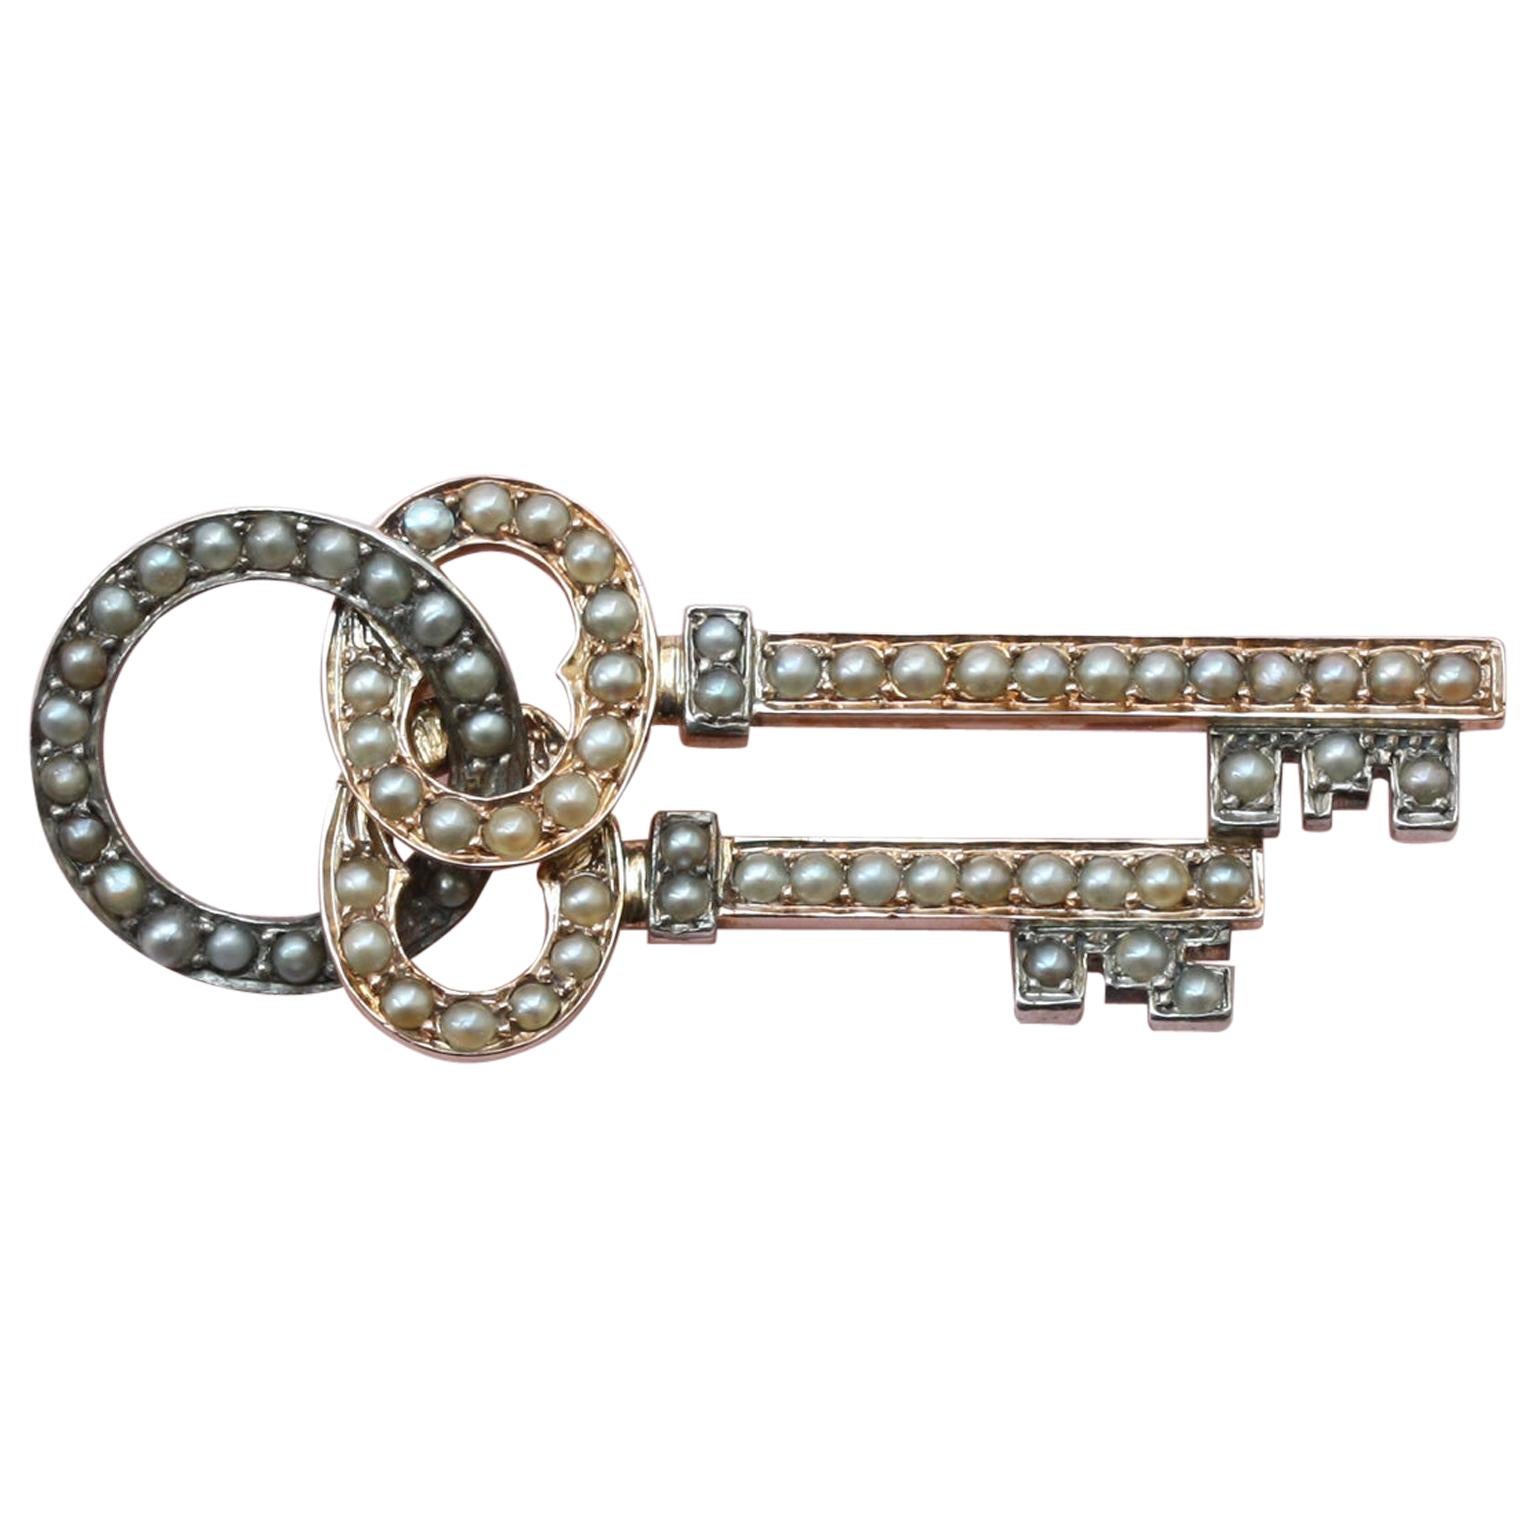 Gold and Pearl Key Brooch